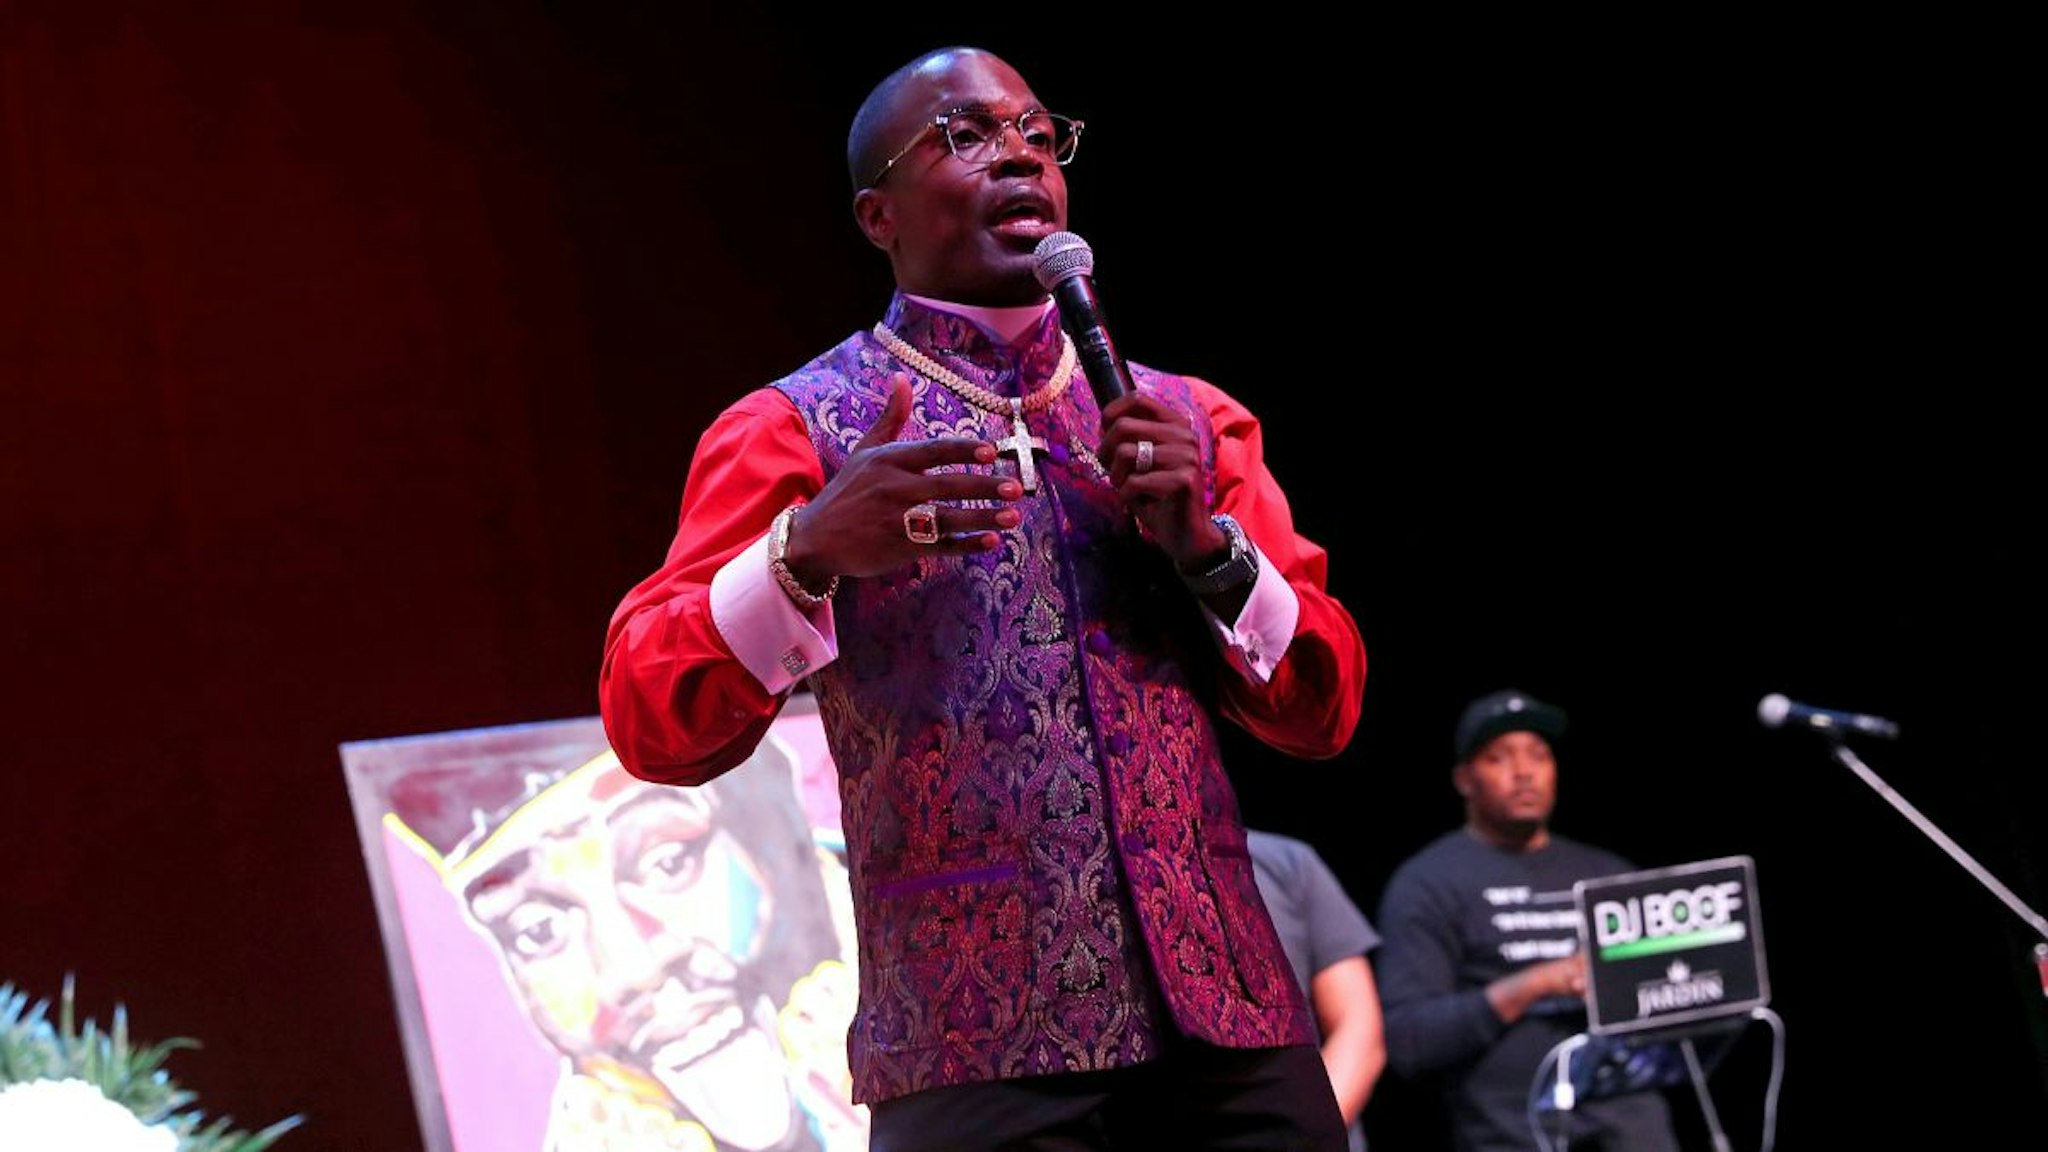 Bishop Lamor Miller Whitehead speaks during the celebration of life for Biz Markie at Patchogue Theatre for the Performing Arts on August 02, 2021 in Patchogue, New York.